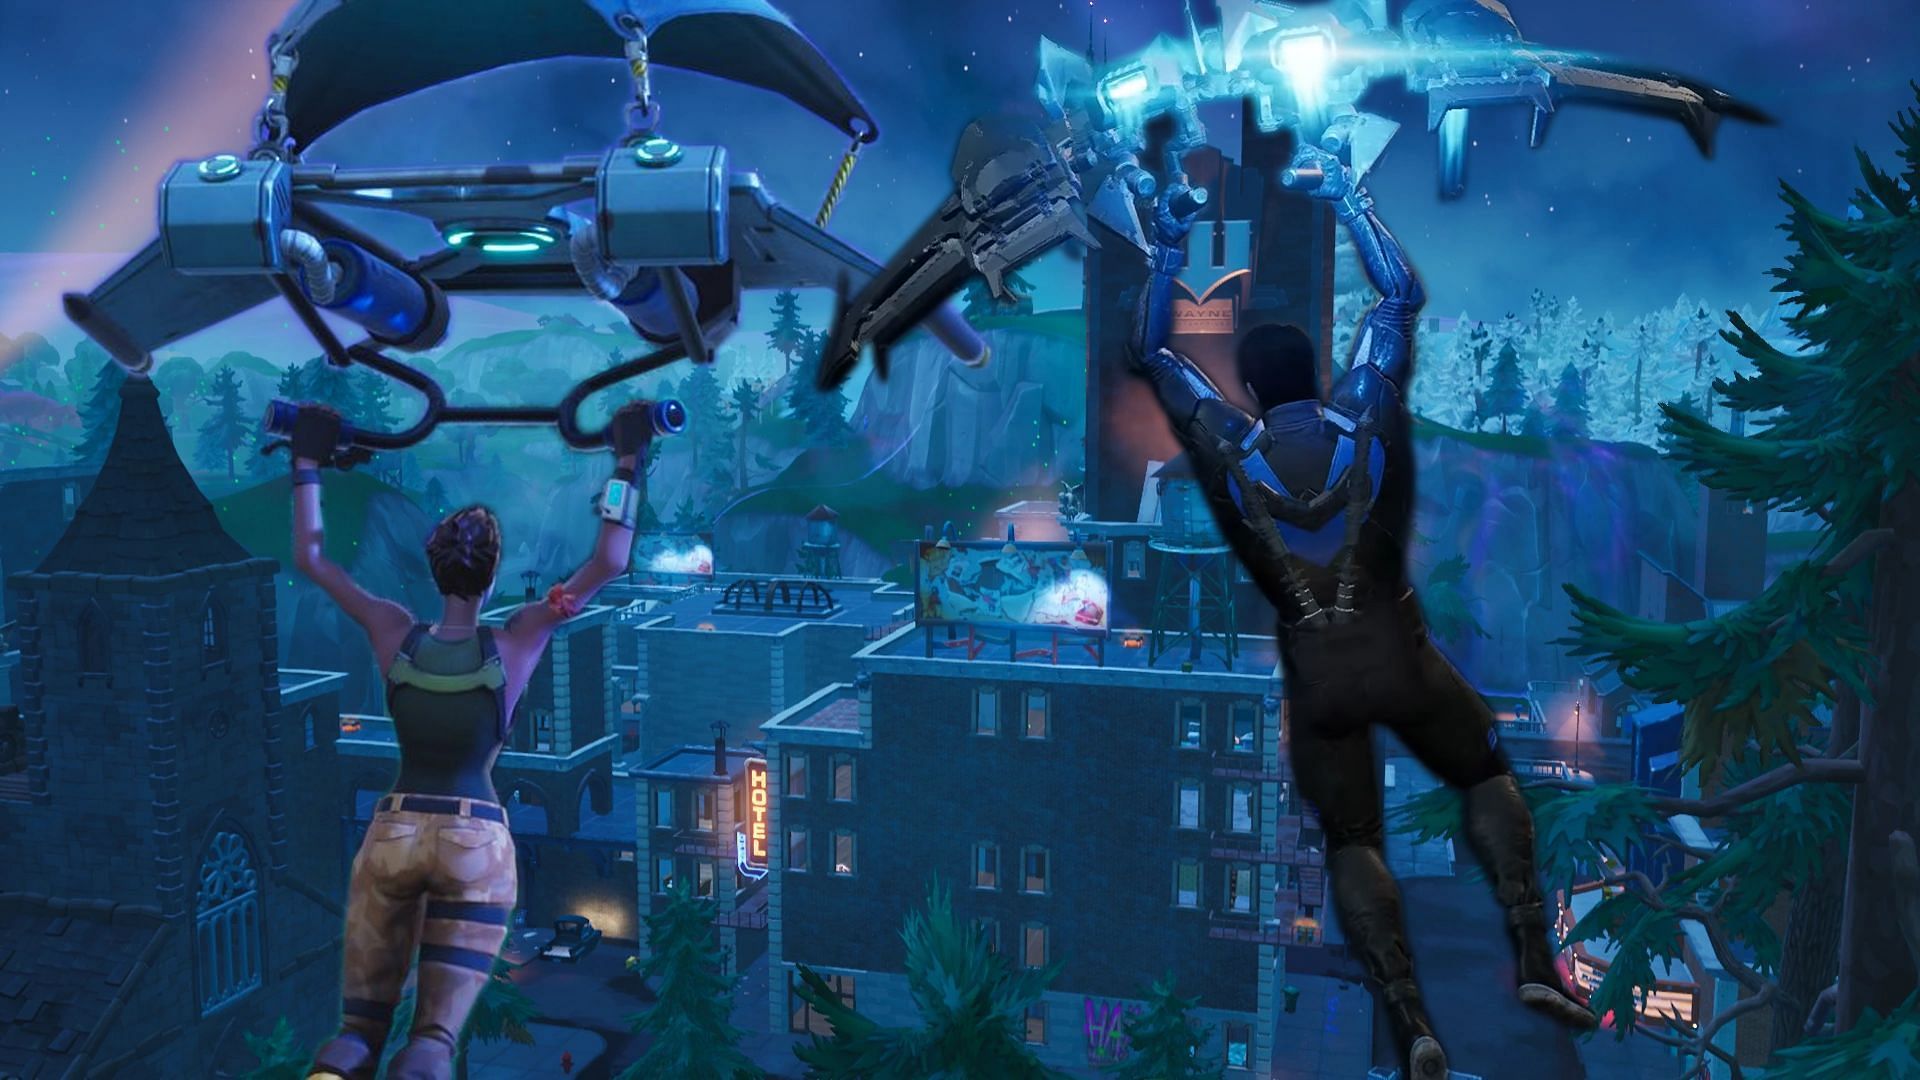 Fortnite x Gotham Knights collab may arrive with Batgirl, Red Hood, and more skins